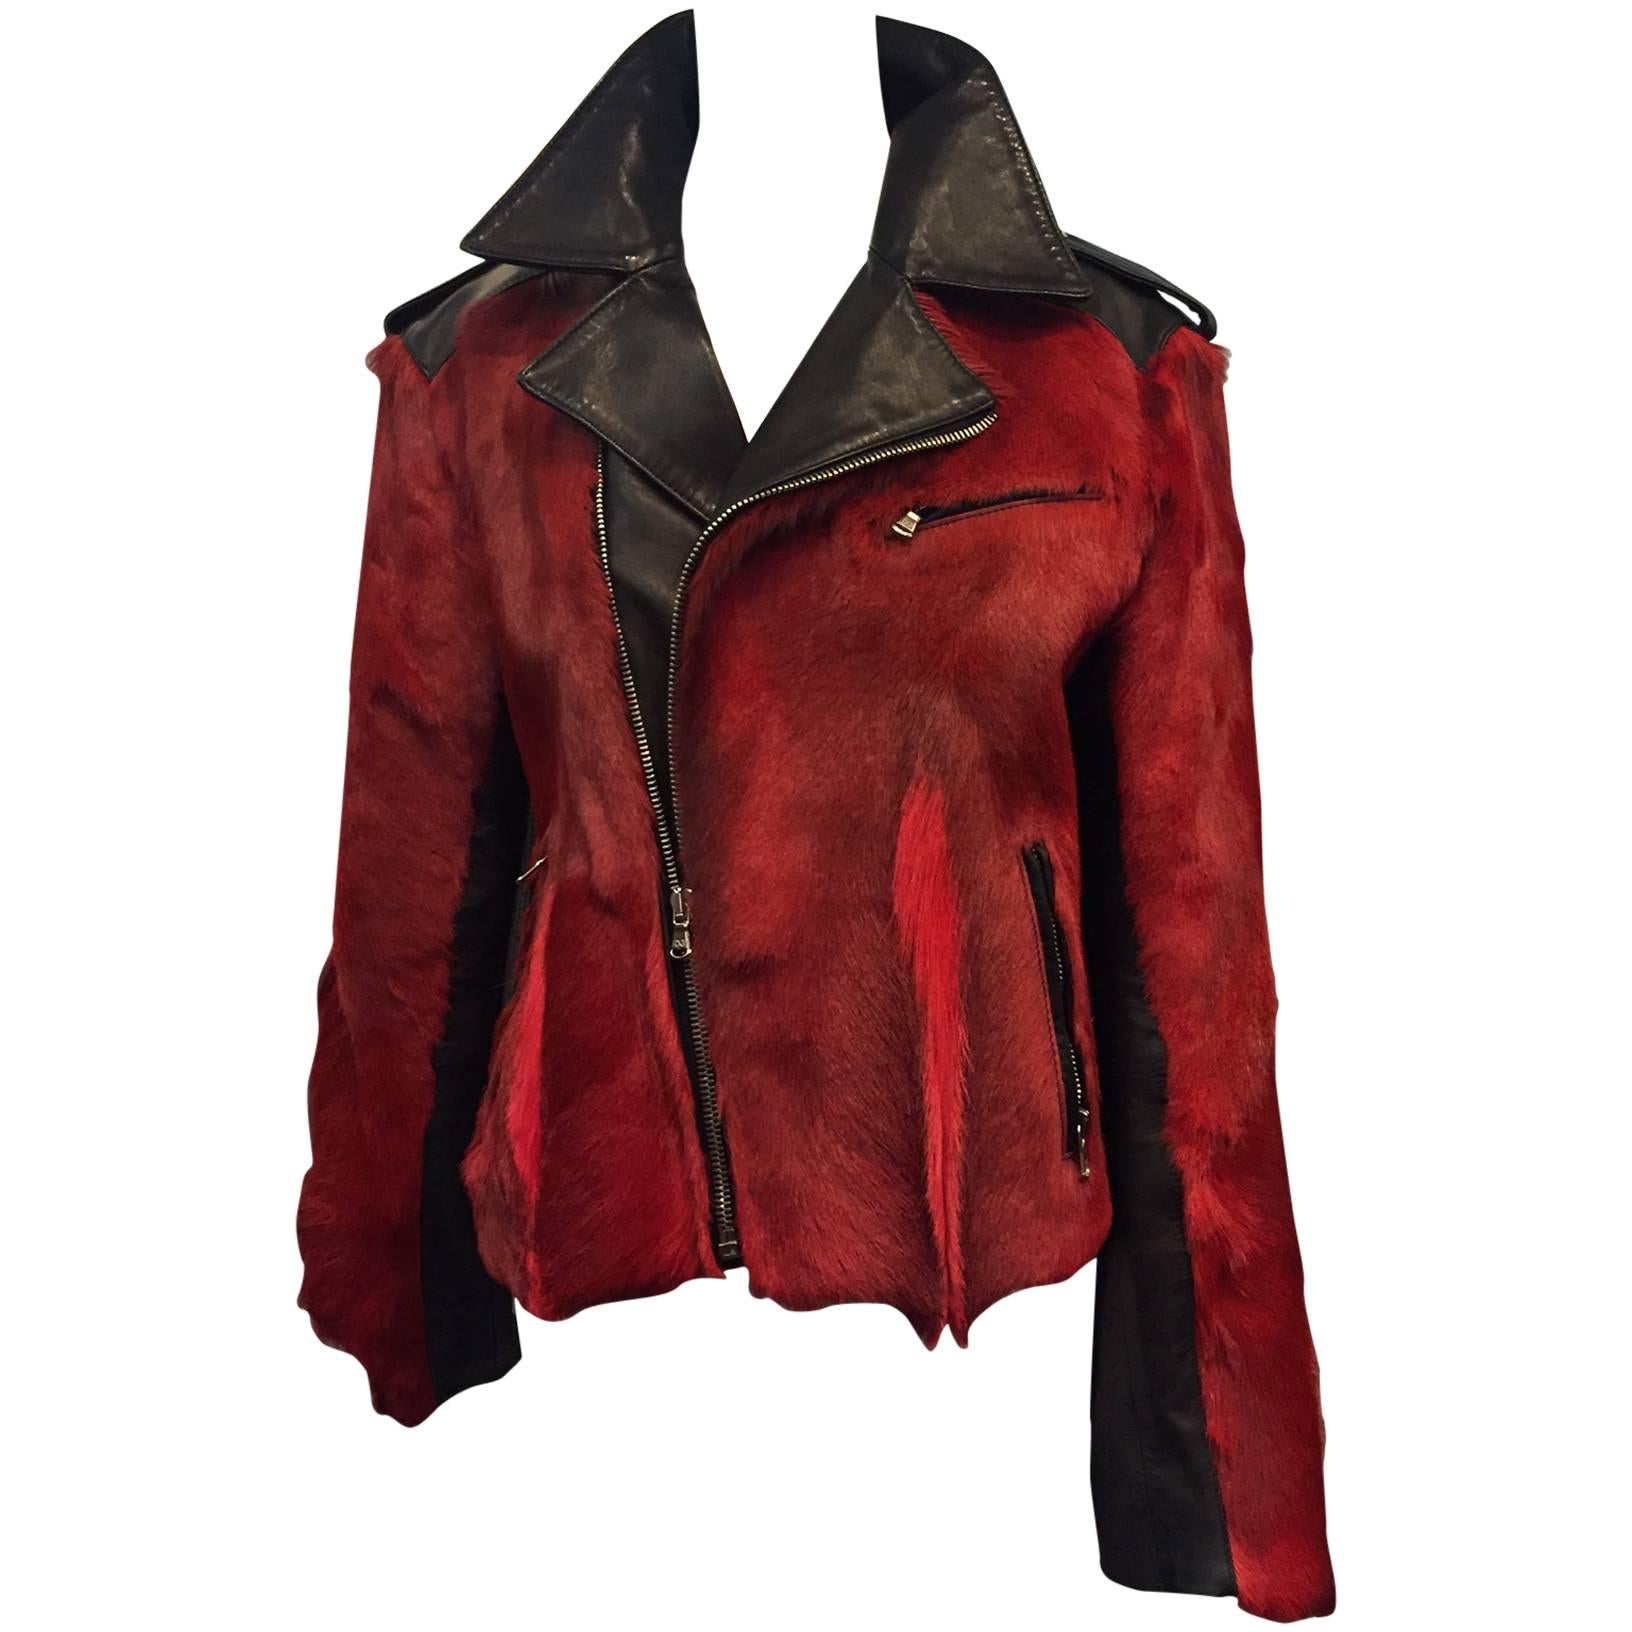 Dolce & Gabbana Red Goat Hide and Black Leather Motorcycle Jacket. 